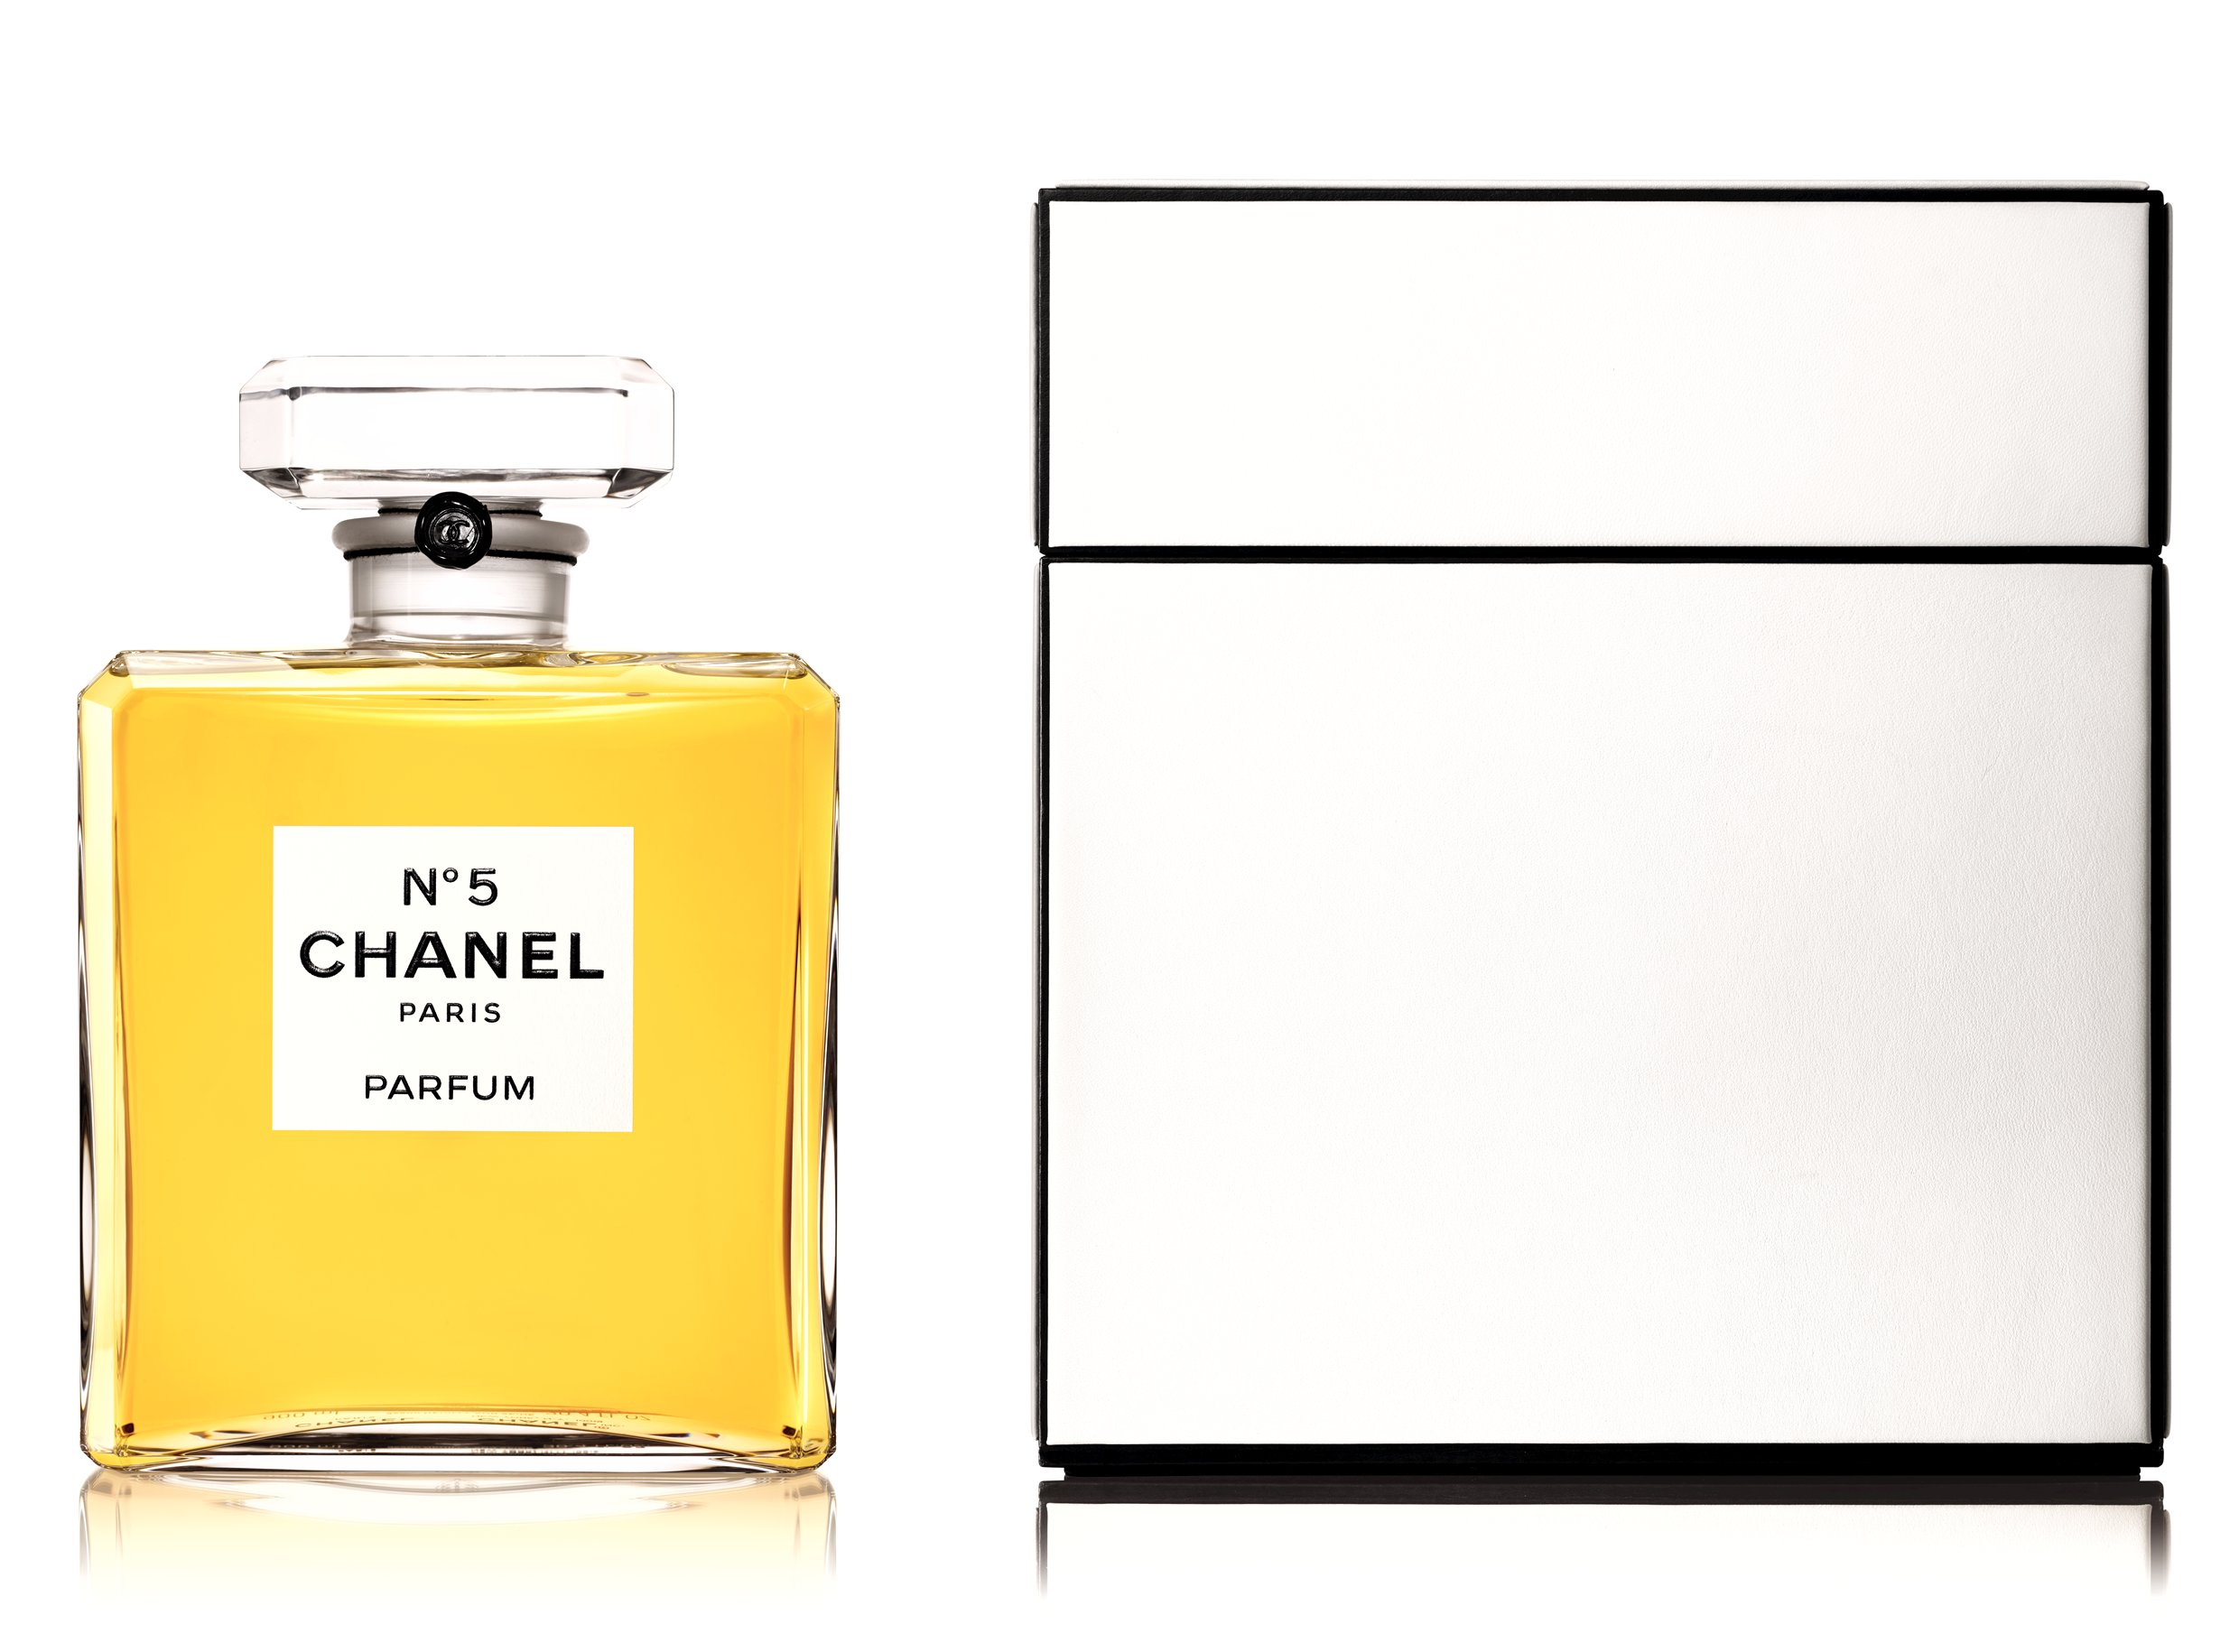 Chanel centenary: Celebrating 100 years of the iconic No 5 perfume